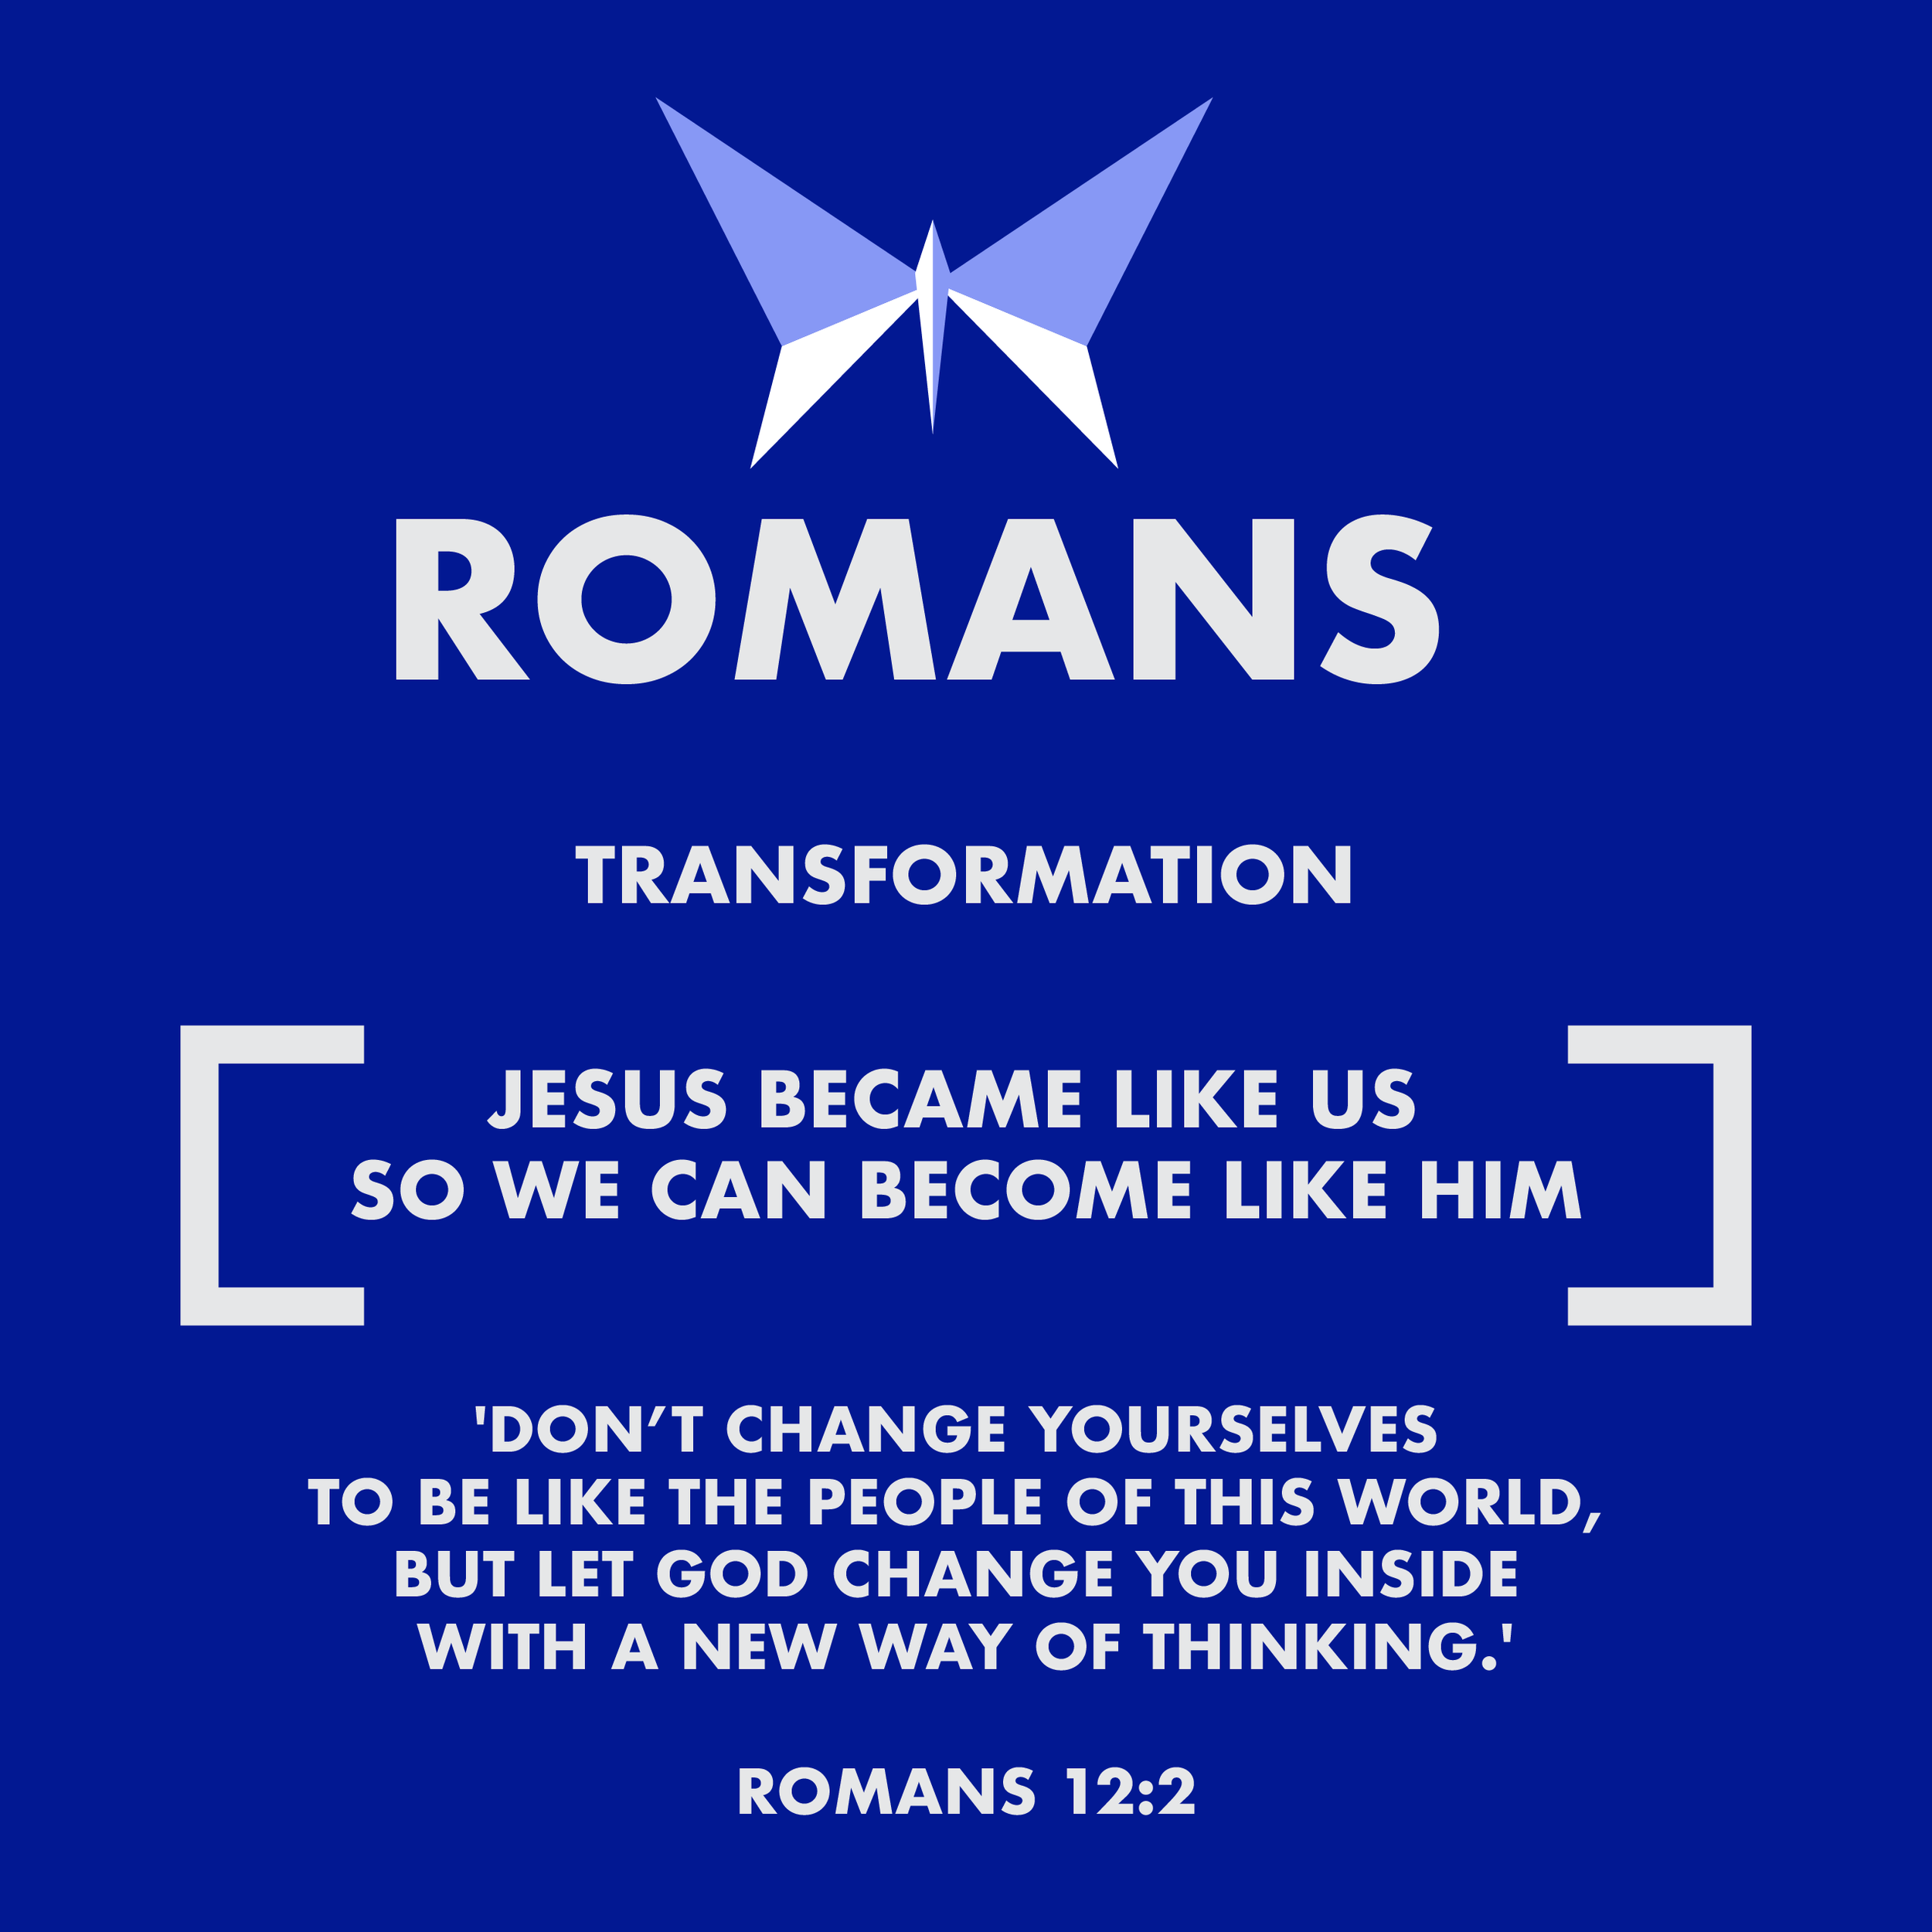 Books of the Bible_posters_43 Romans.png